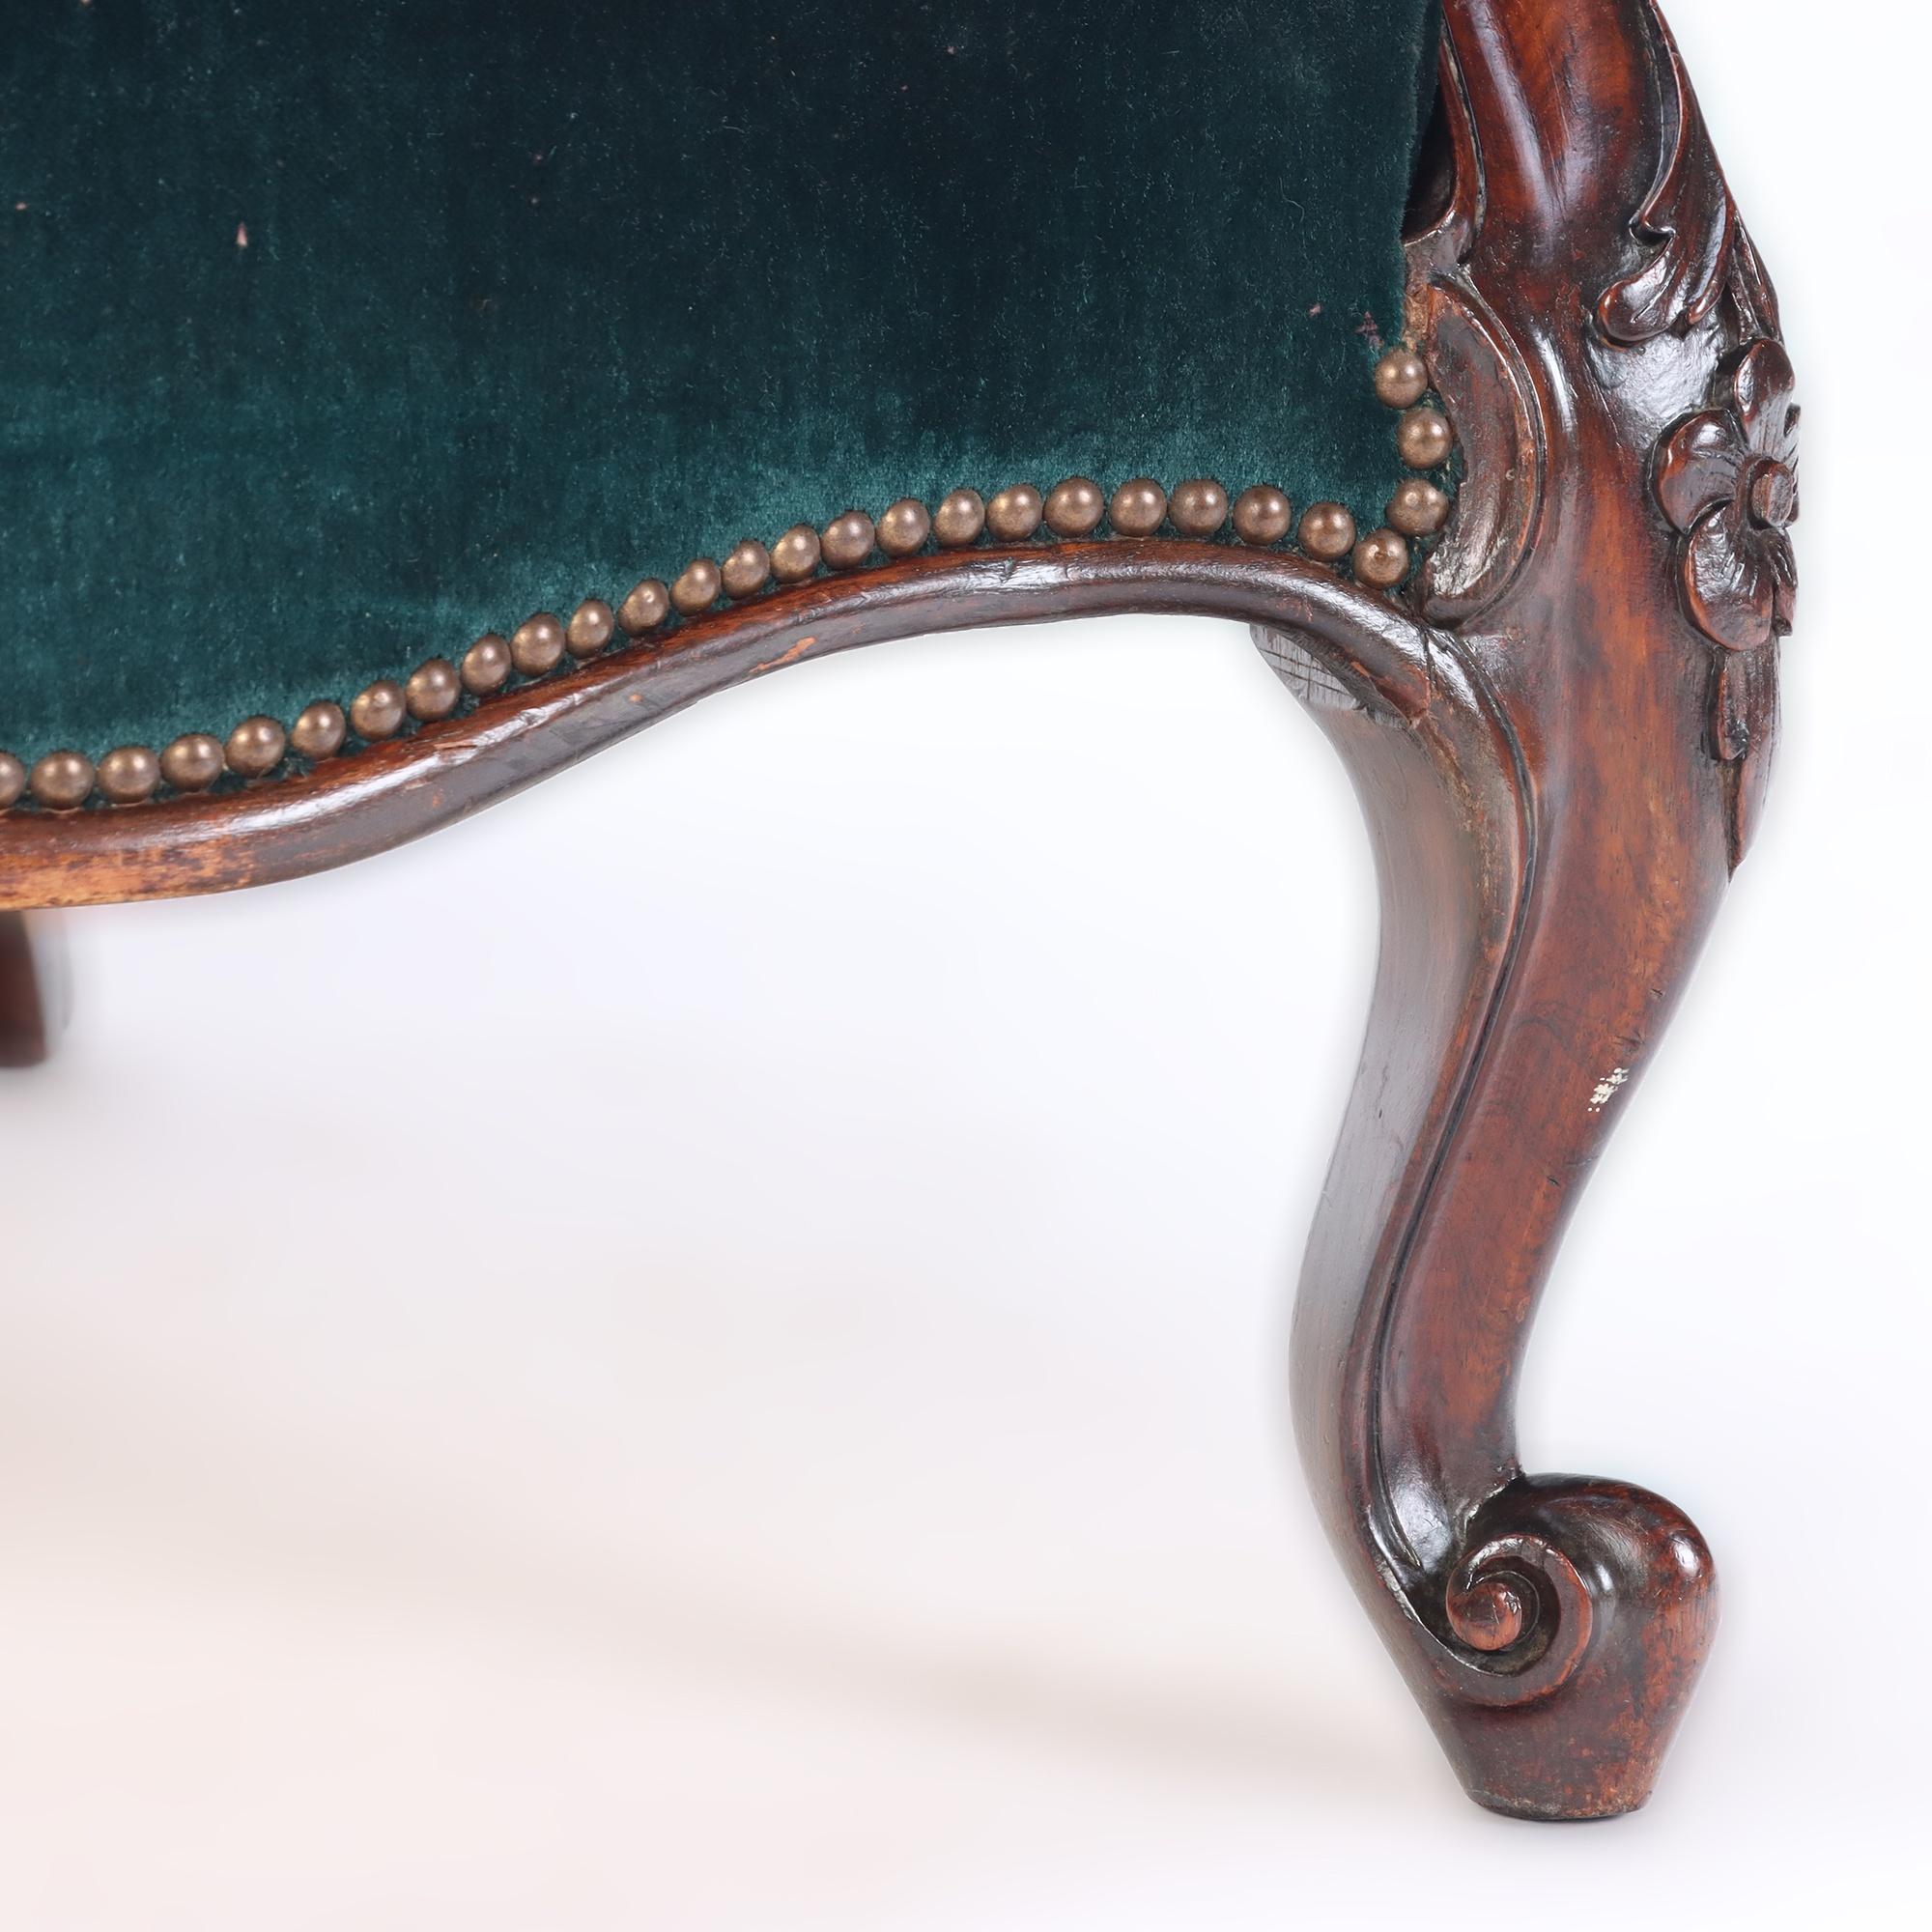 Imposing Velvet Upholstered Library Armchair with Continuous Arm, 19th C. For Sale 2